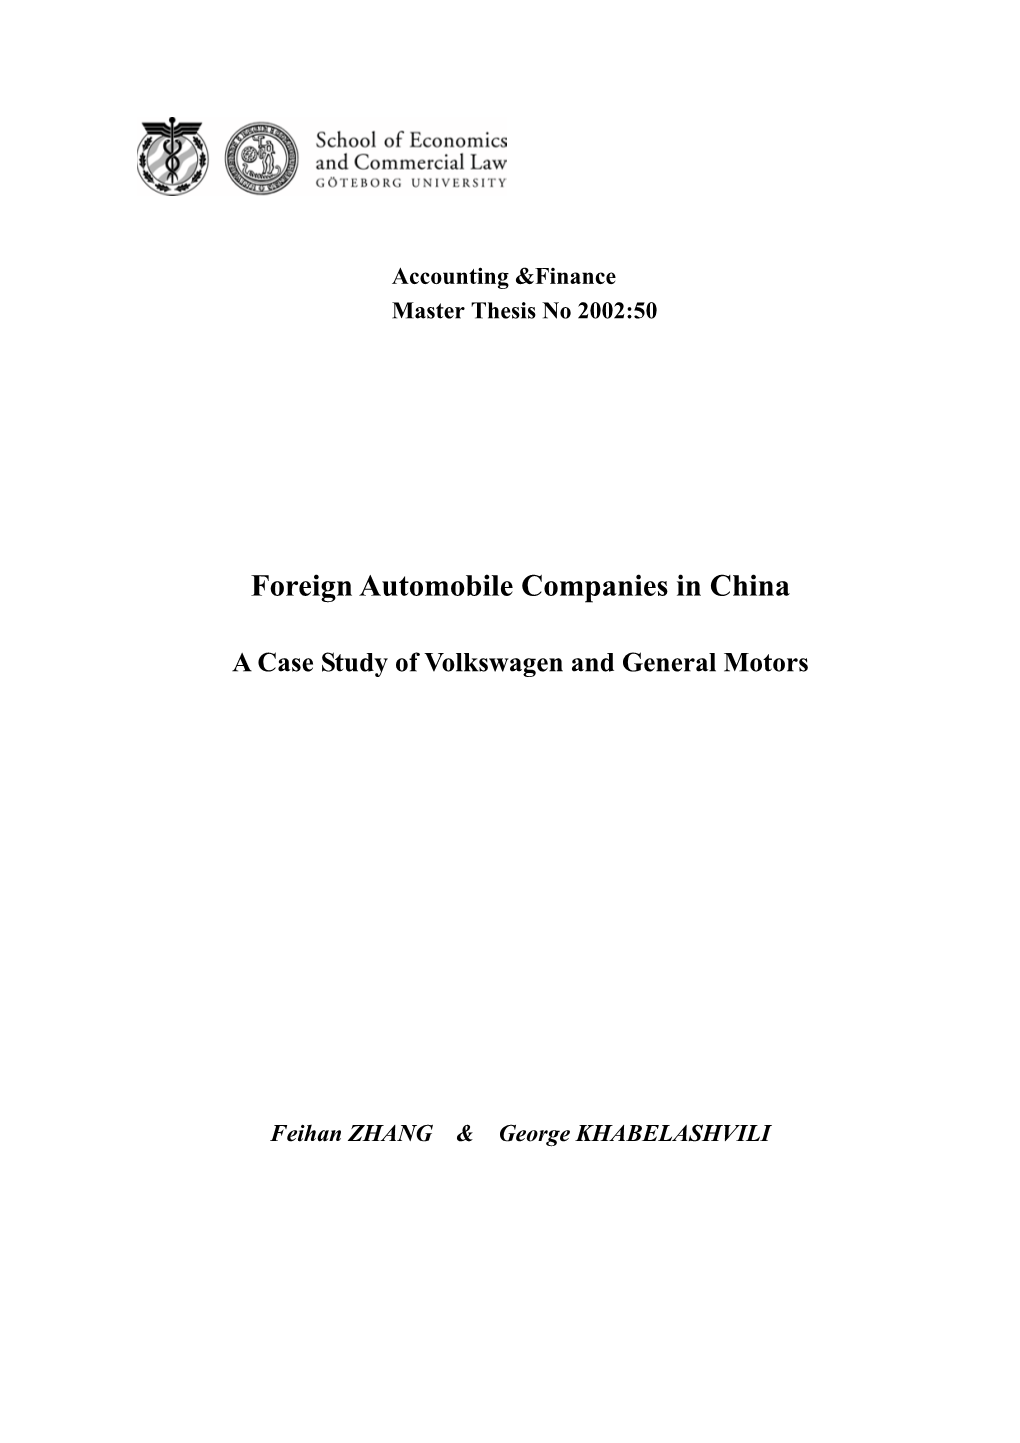 Foreign Automobile Companies in China